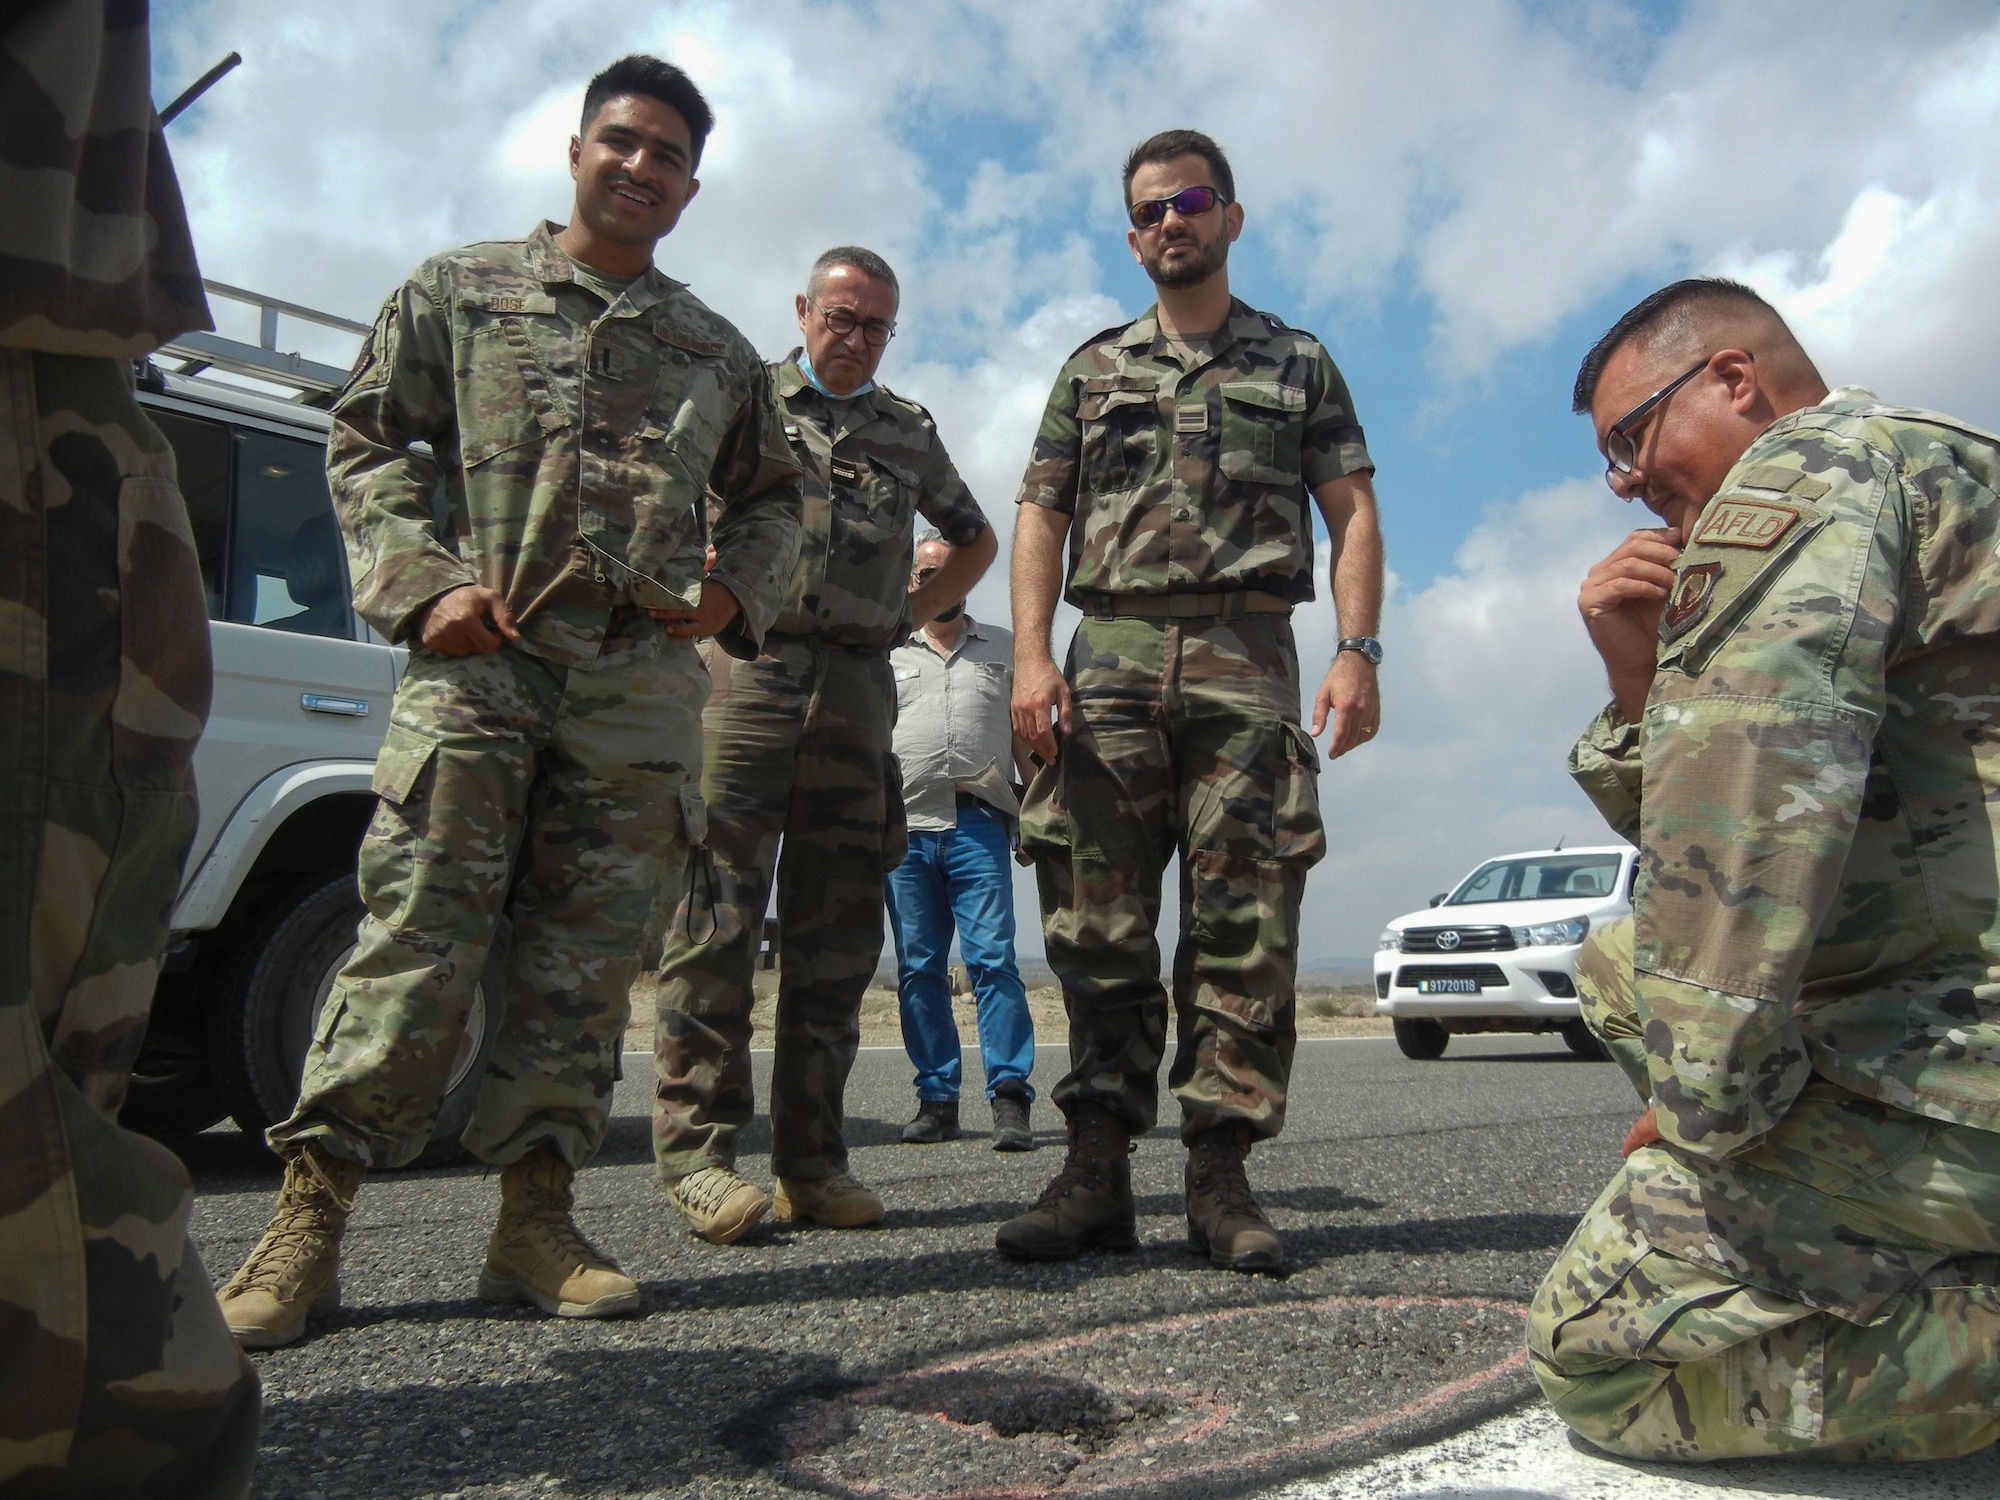 Airmen from the 776th Expeditionary Air Base Squadron airfield operations flight hosted members from the French military to discuss runway repairs at Chabelley Airfield (CADJ), Djibouti, March 10, 2022. As a part of a trilateral agreement, CADJ is a French installation operated by the United States in the country of Djibouti demonstrating the various partnerships and alliances the U.S. relies on to strengthen defense institutions and counter a multitude of threats to ensure a more stable, prosperous Africa. (U.S. Air Force courtesy photo by Tech. Sgt. Joel Yerk